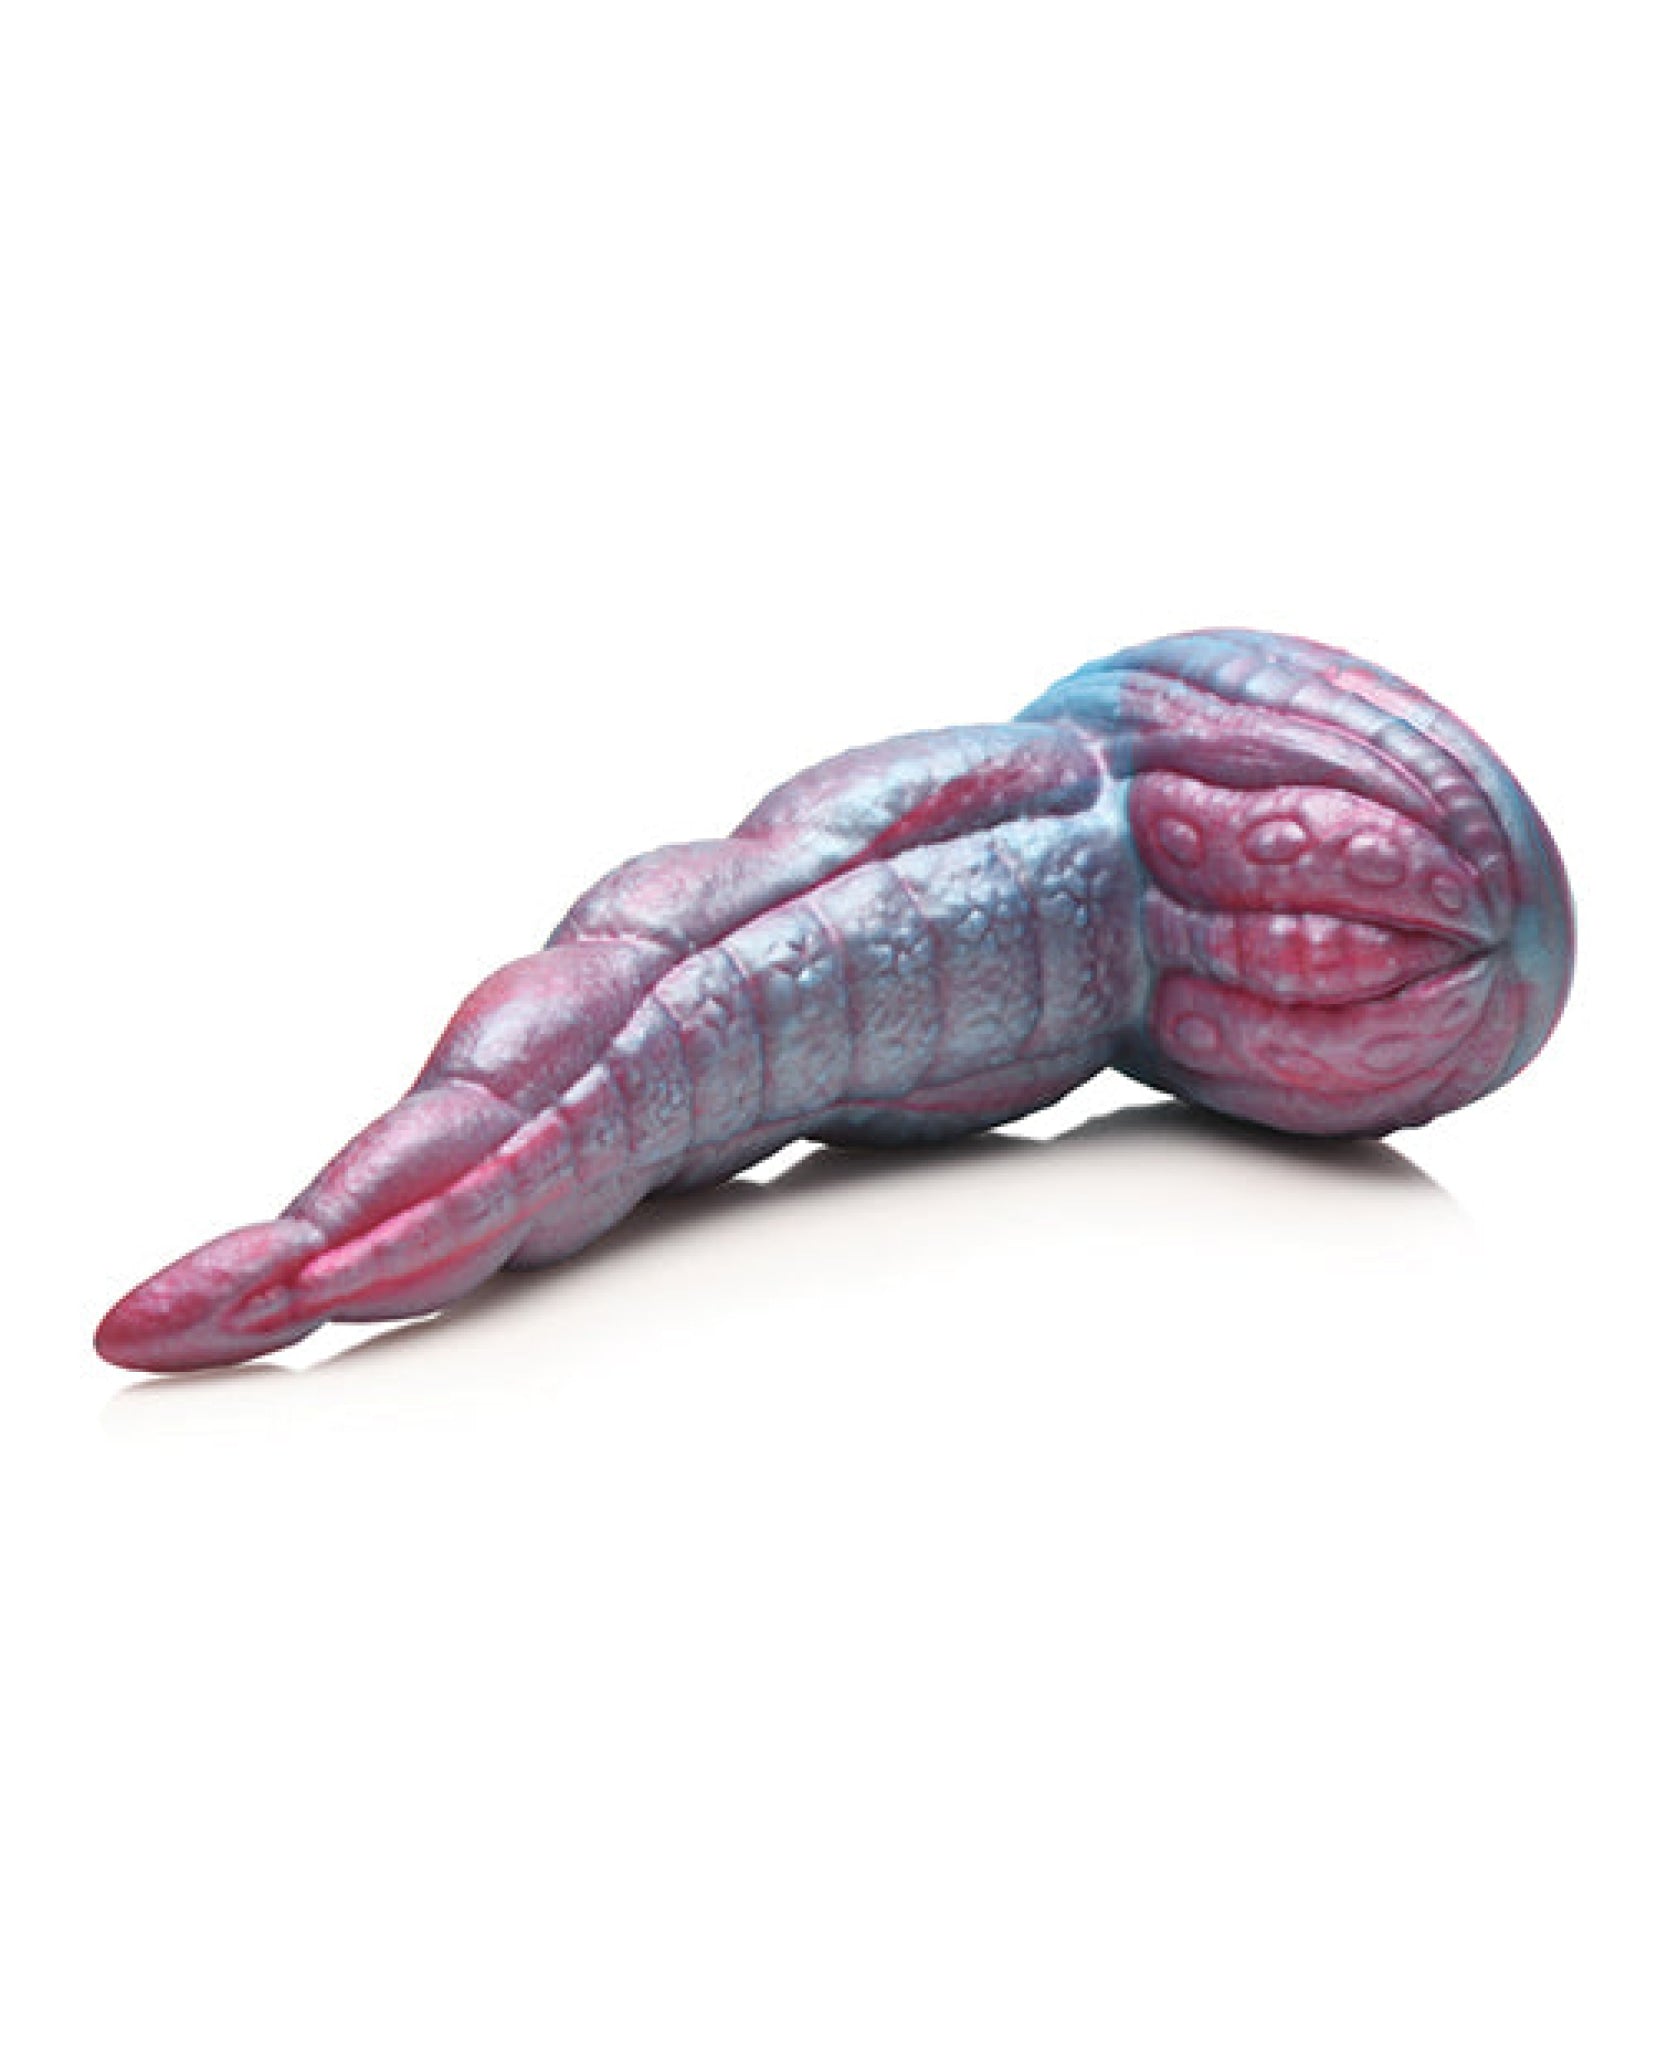 Creature Cocks Tentacle Cock Silicone Dildo - Red/Blue Xr LLC